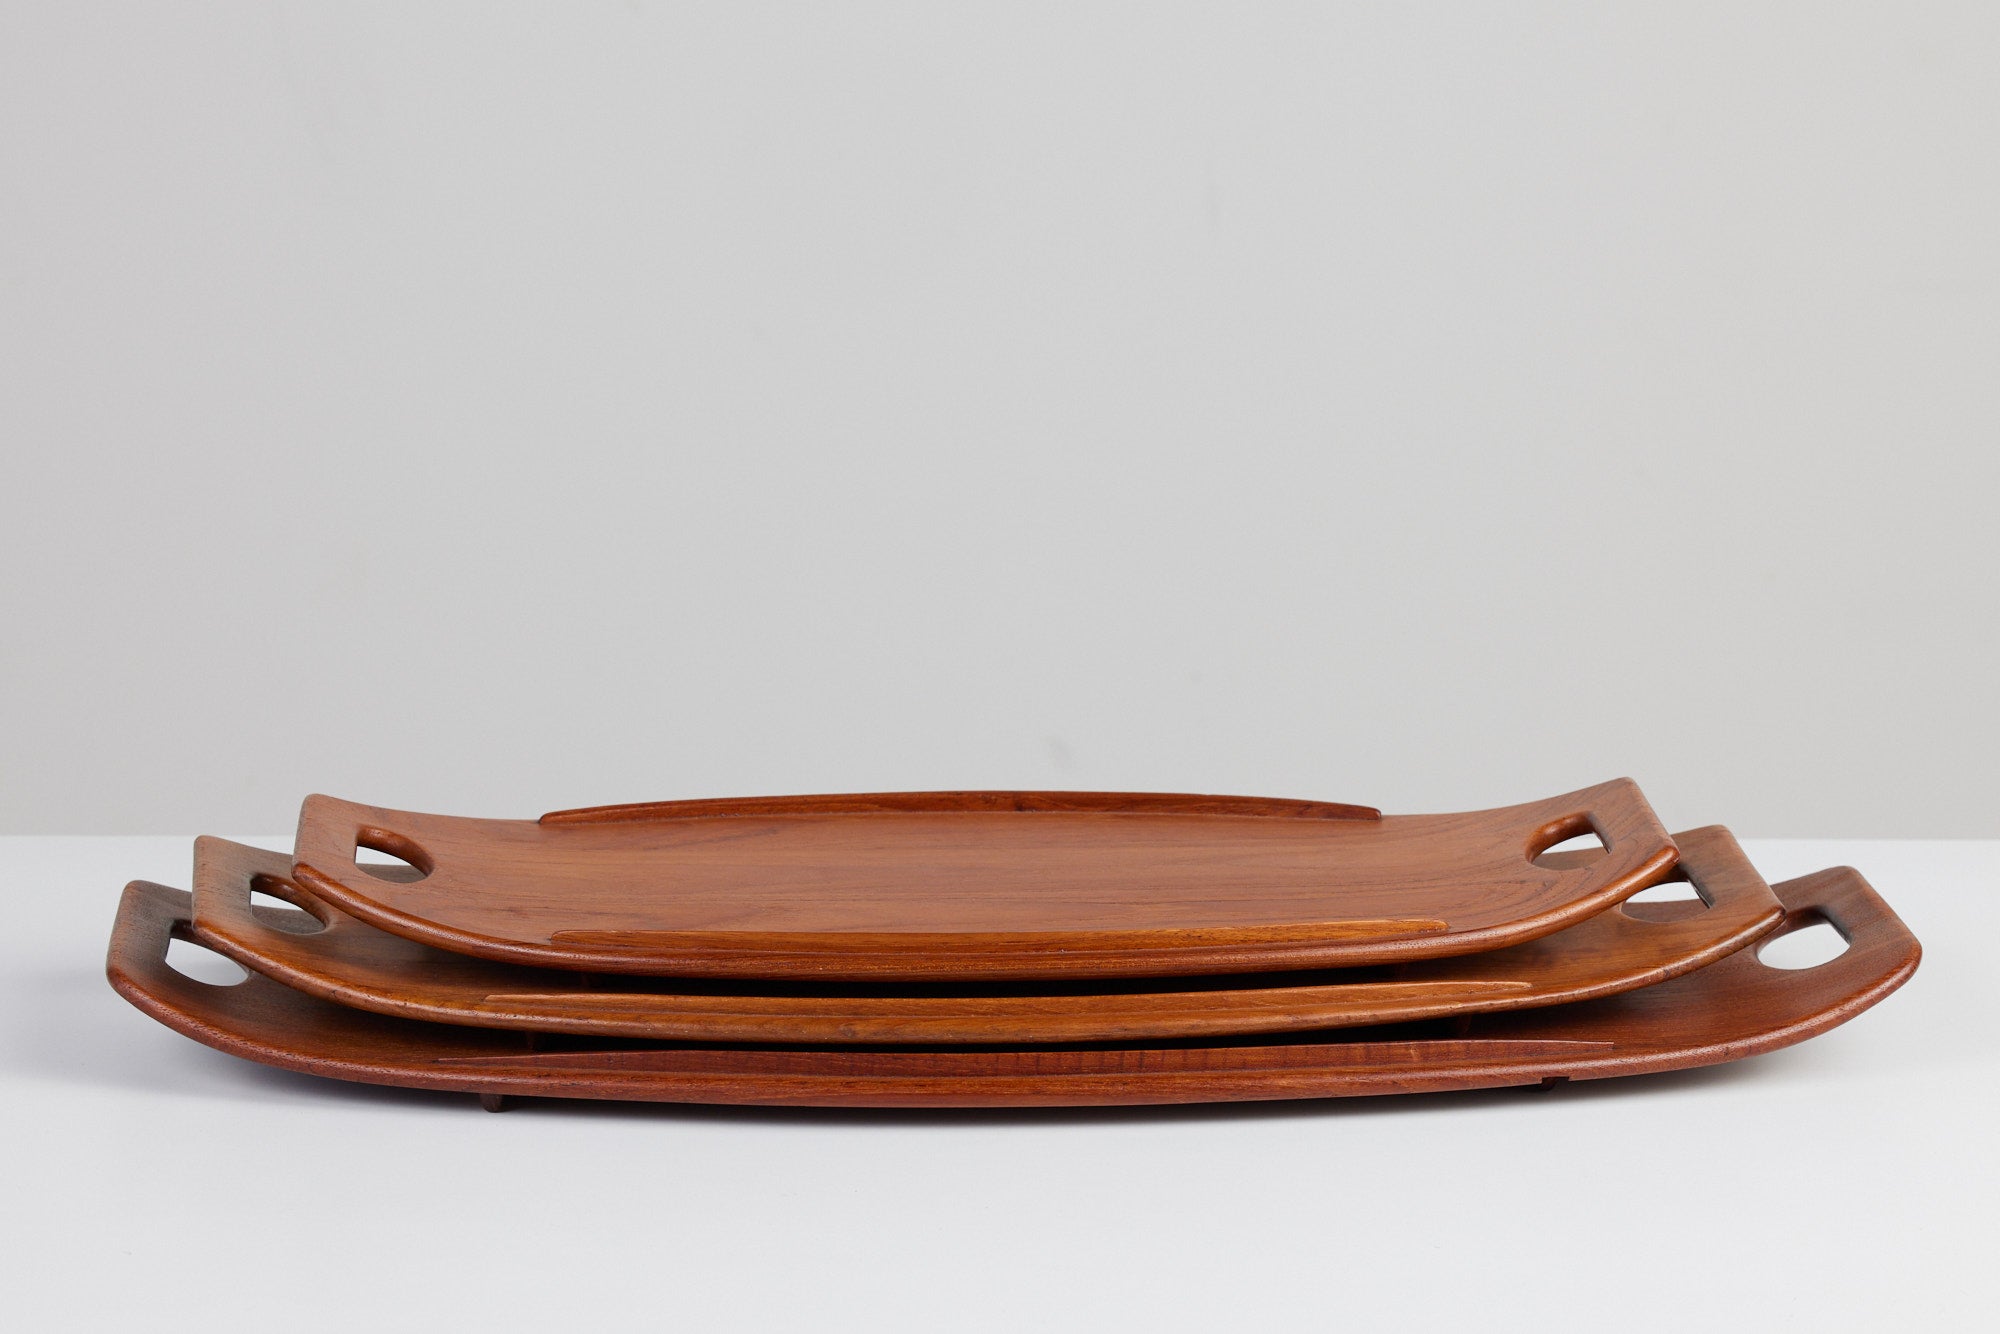 Set of Three Serving Trays by Jens Quistgaard for Dansk